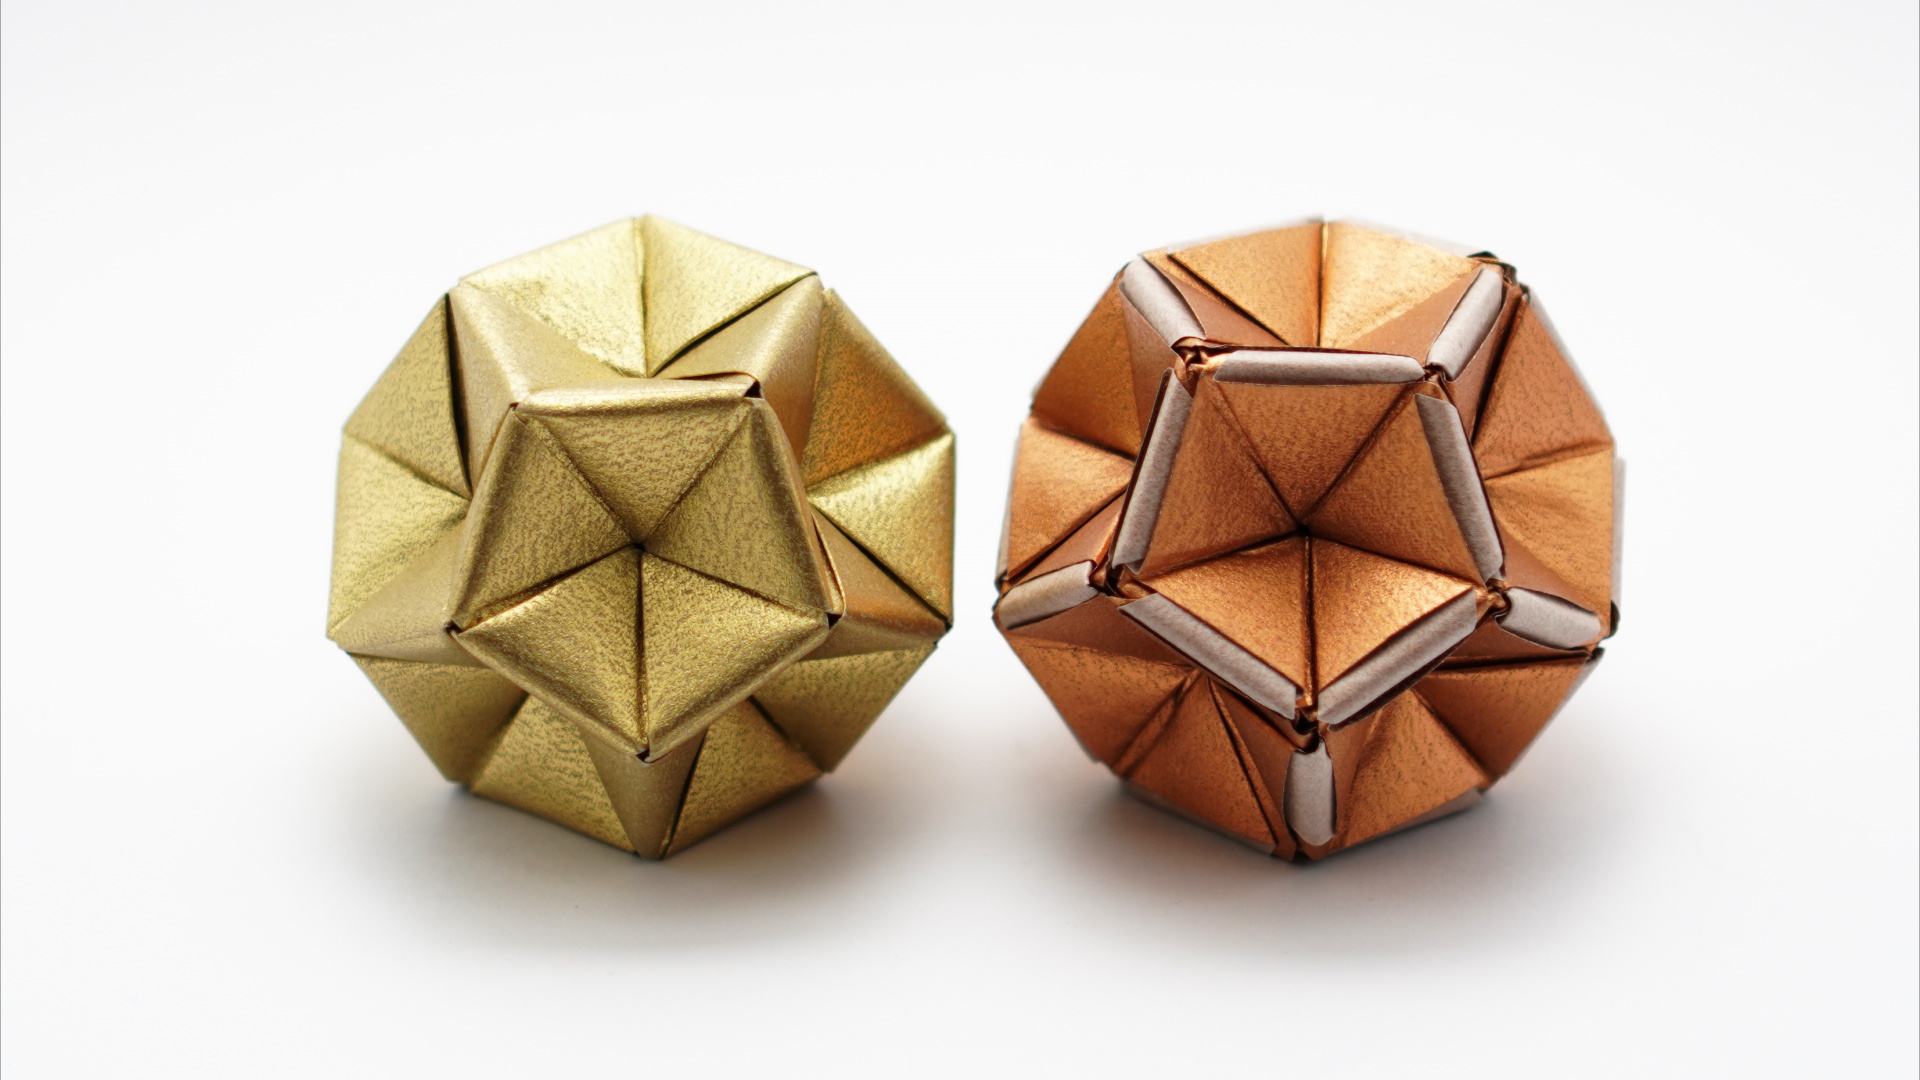 Origami Excavated Dodecahedron